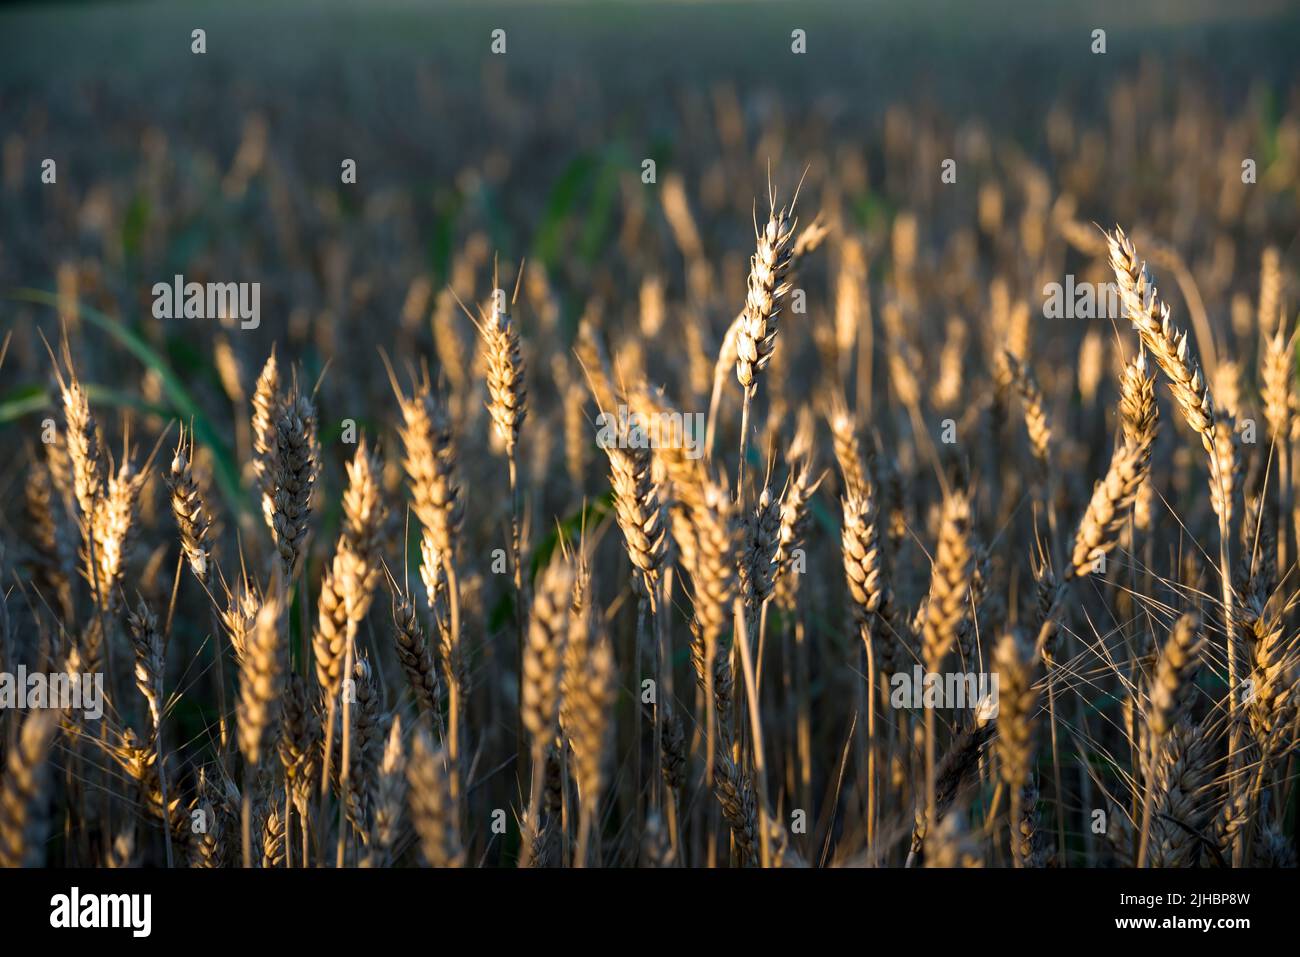 Wheat ears on the field at sunset Stock Photo